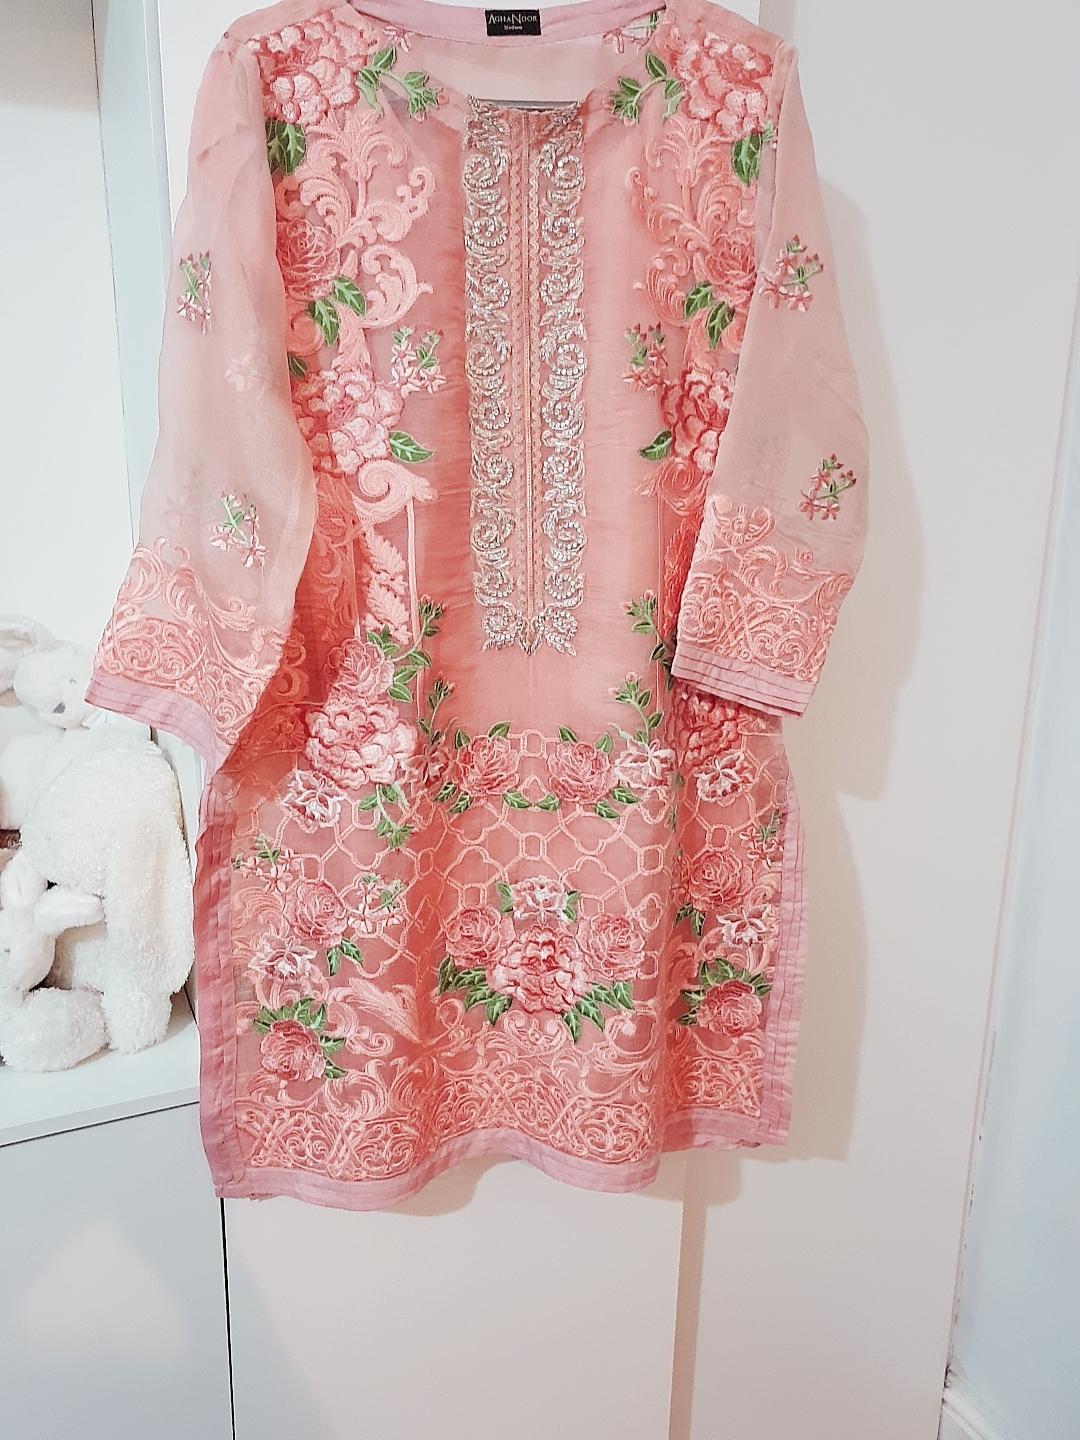 AGHA NOOR dress full suit size medium in M33 Trafford for